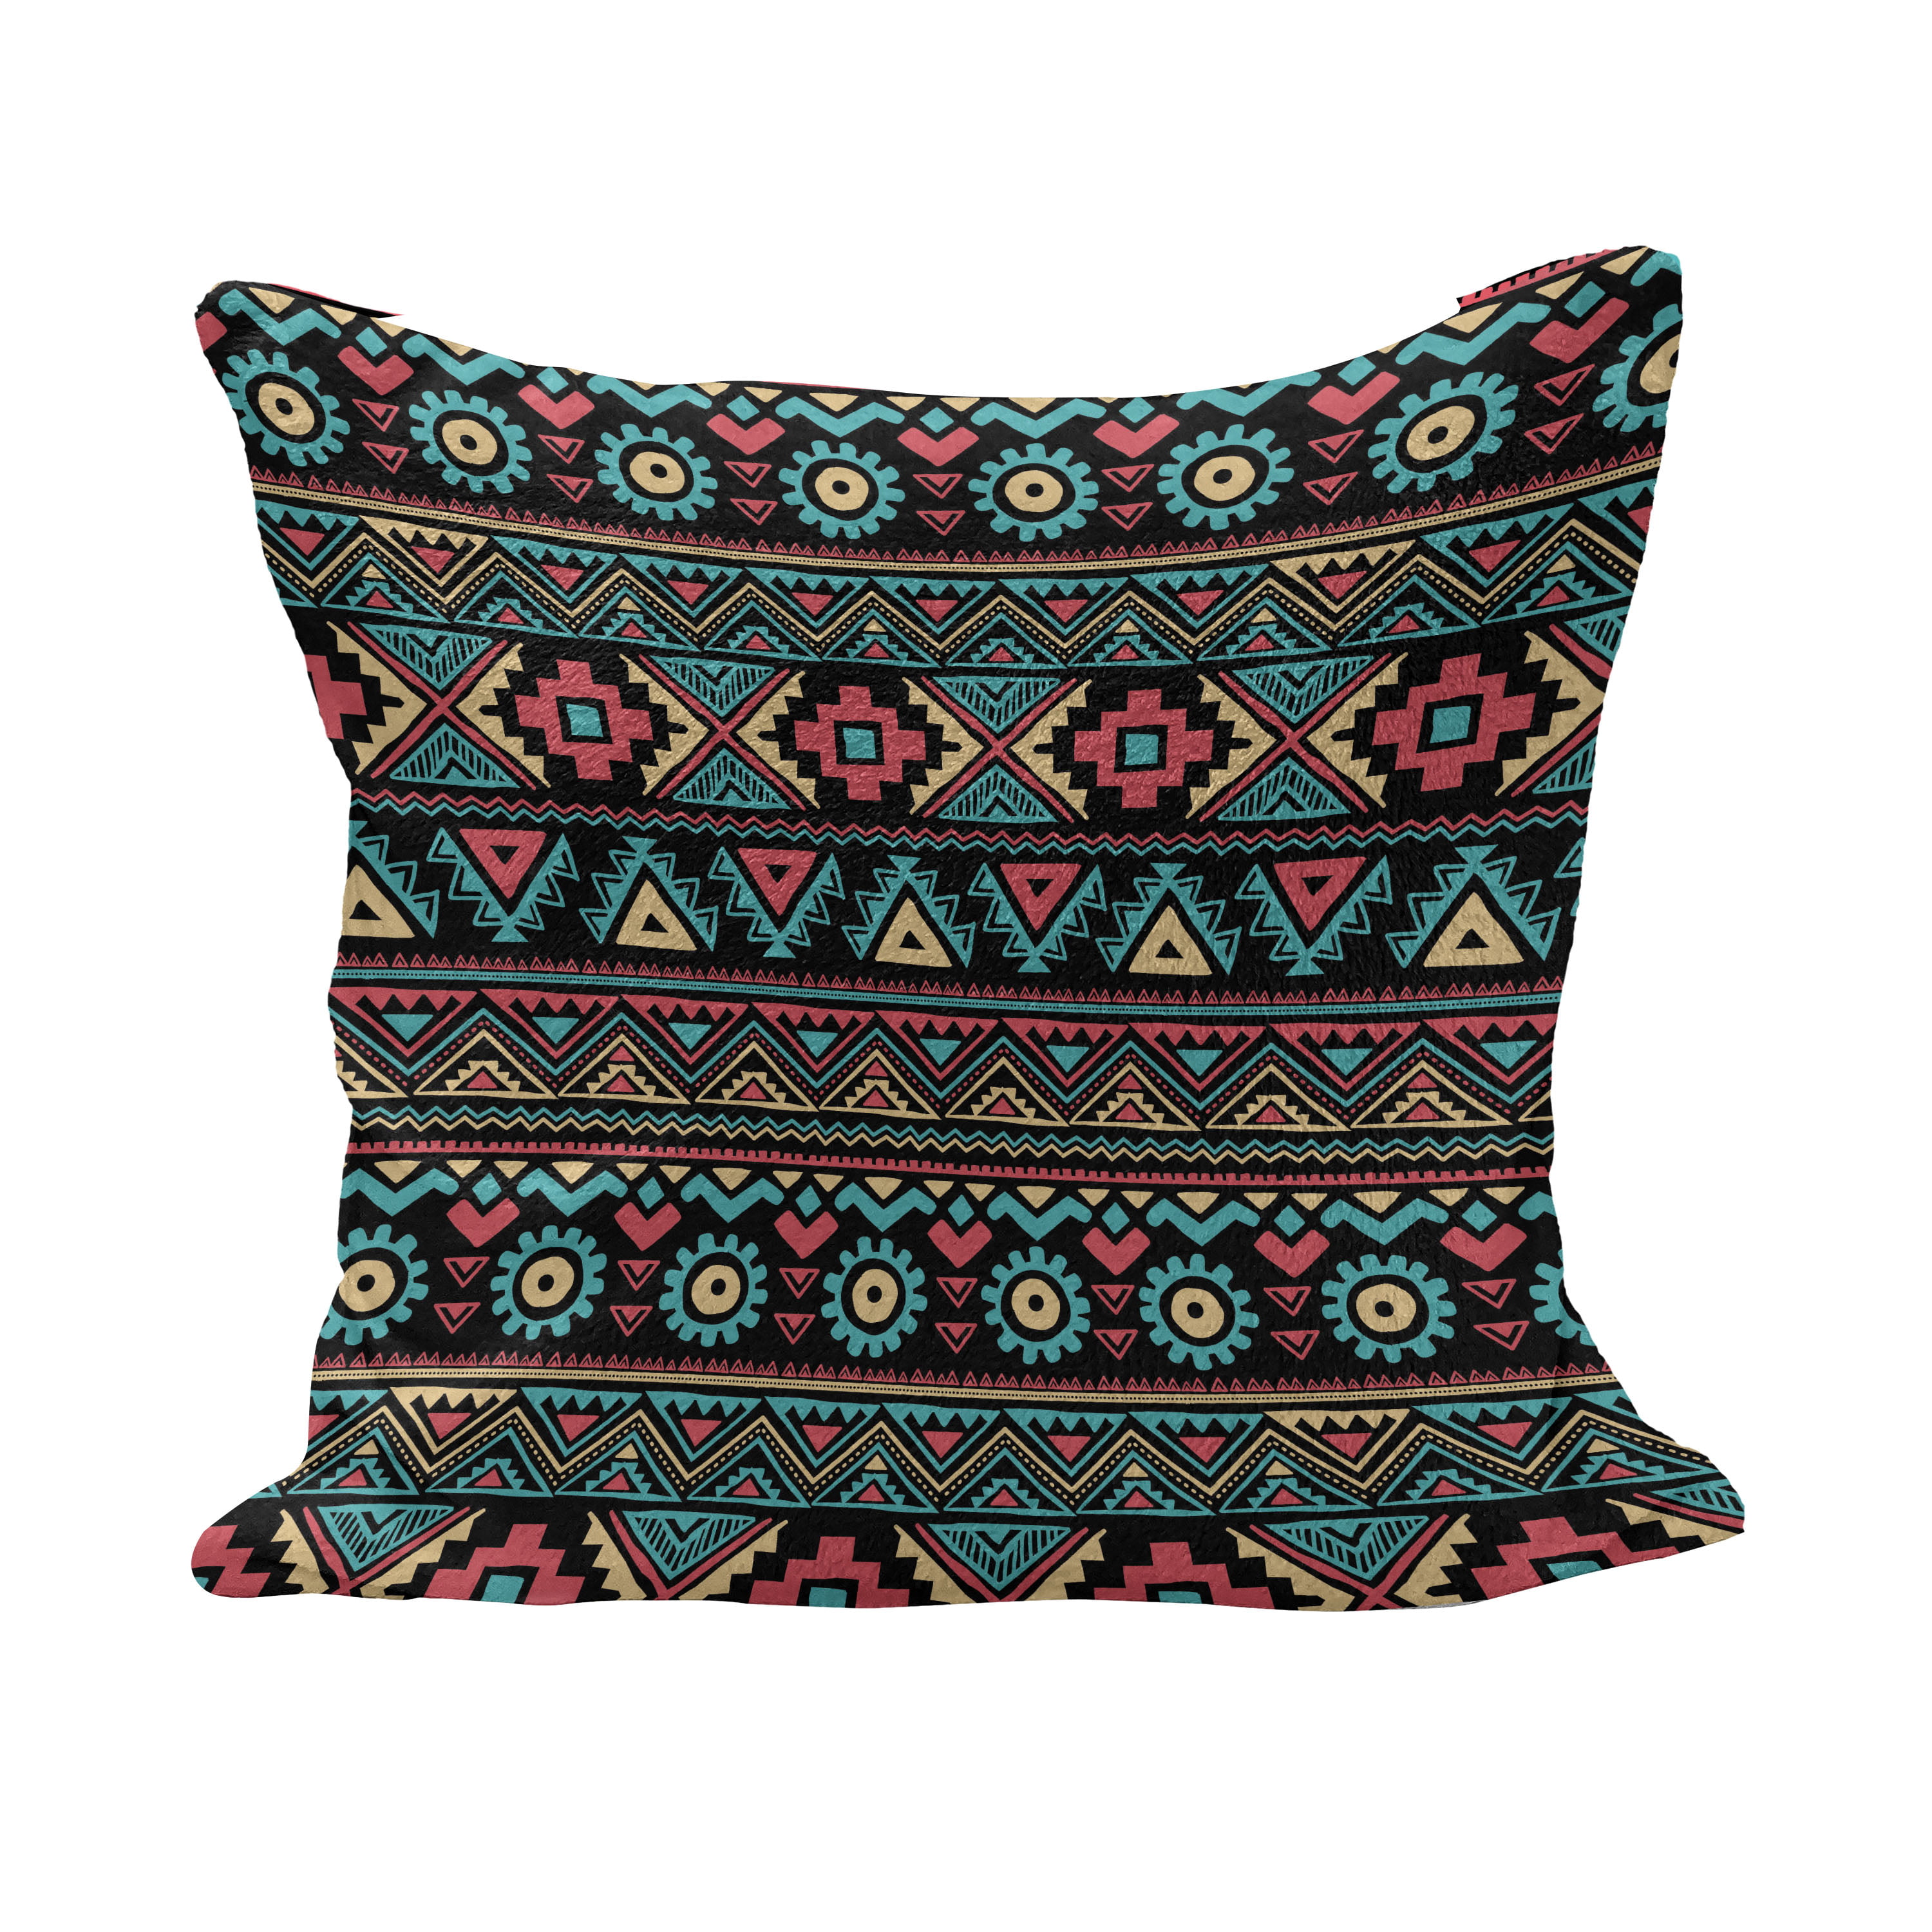 18x18 Multicolor Vintage flower pattern seamless Throw Pillow